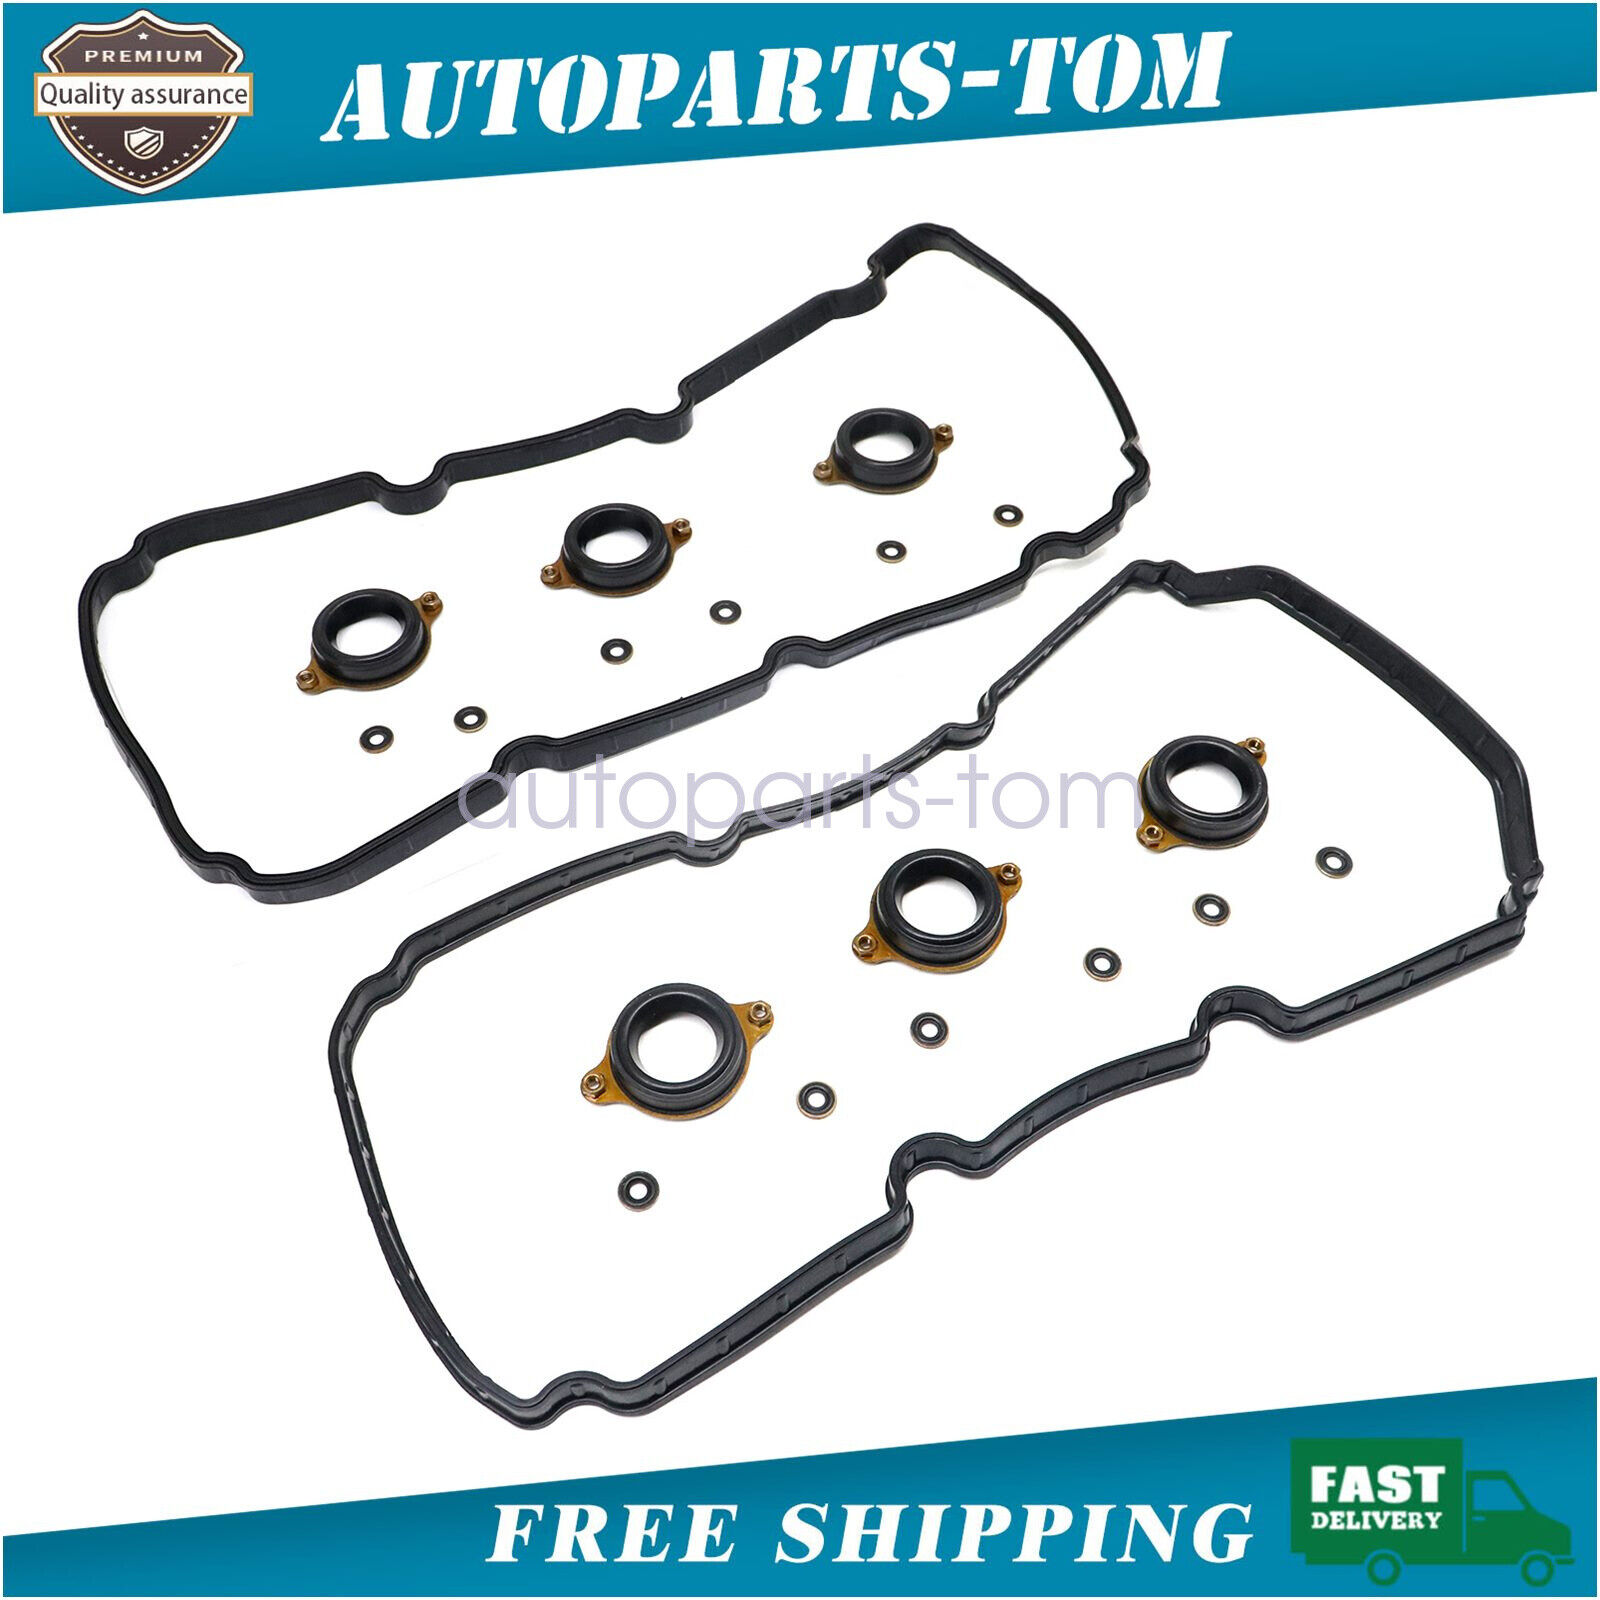 NEW Valve Cover Gasket Set Fits For 2014-2020 Acura MDX TLX 3.5L 120505G0000 US